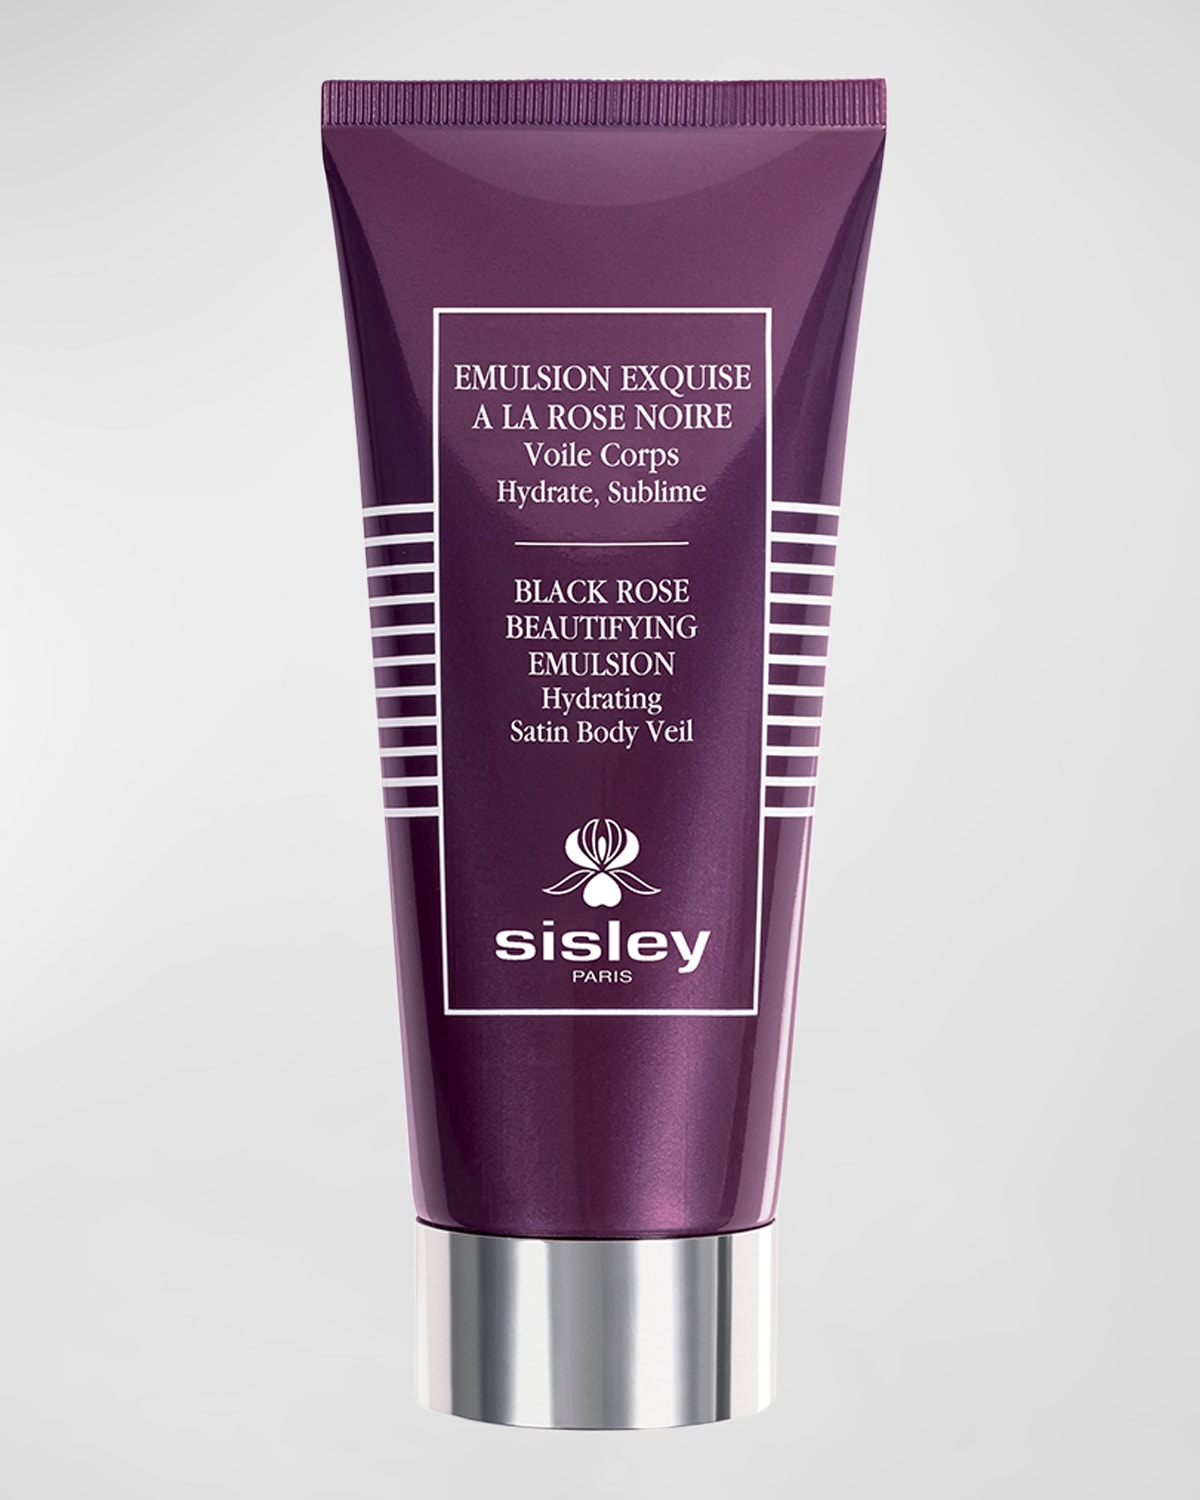 Black Rose Body Emulsion, 6.8 oz. - Yours with any $1,250 Sisley-Paris Purchase